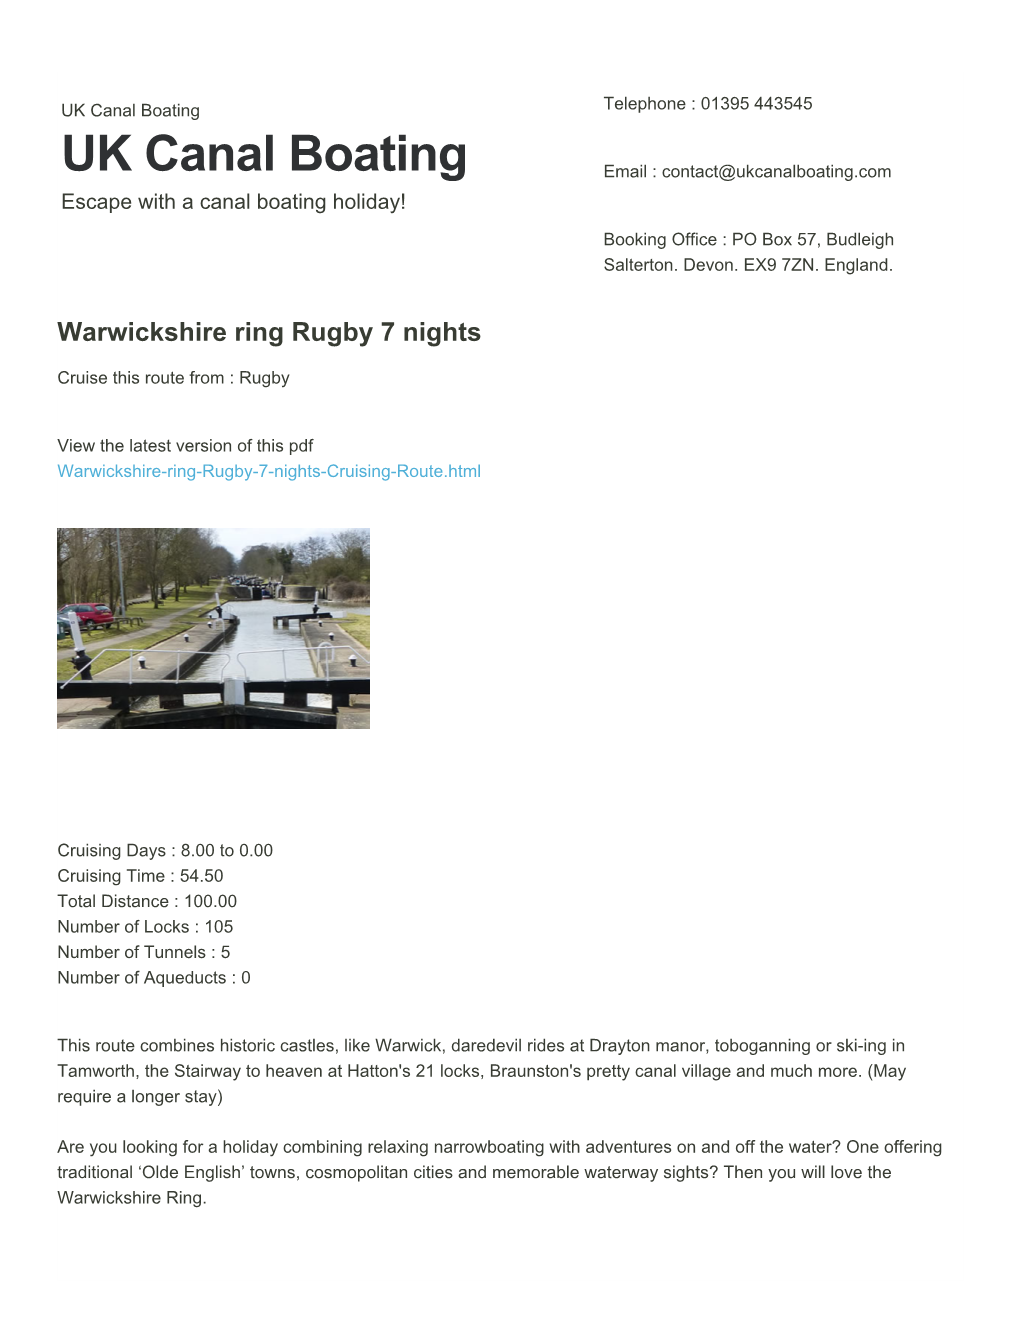 Warwickshire Ring Rugby 7 Nights | UK Canal Boating